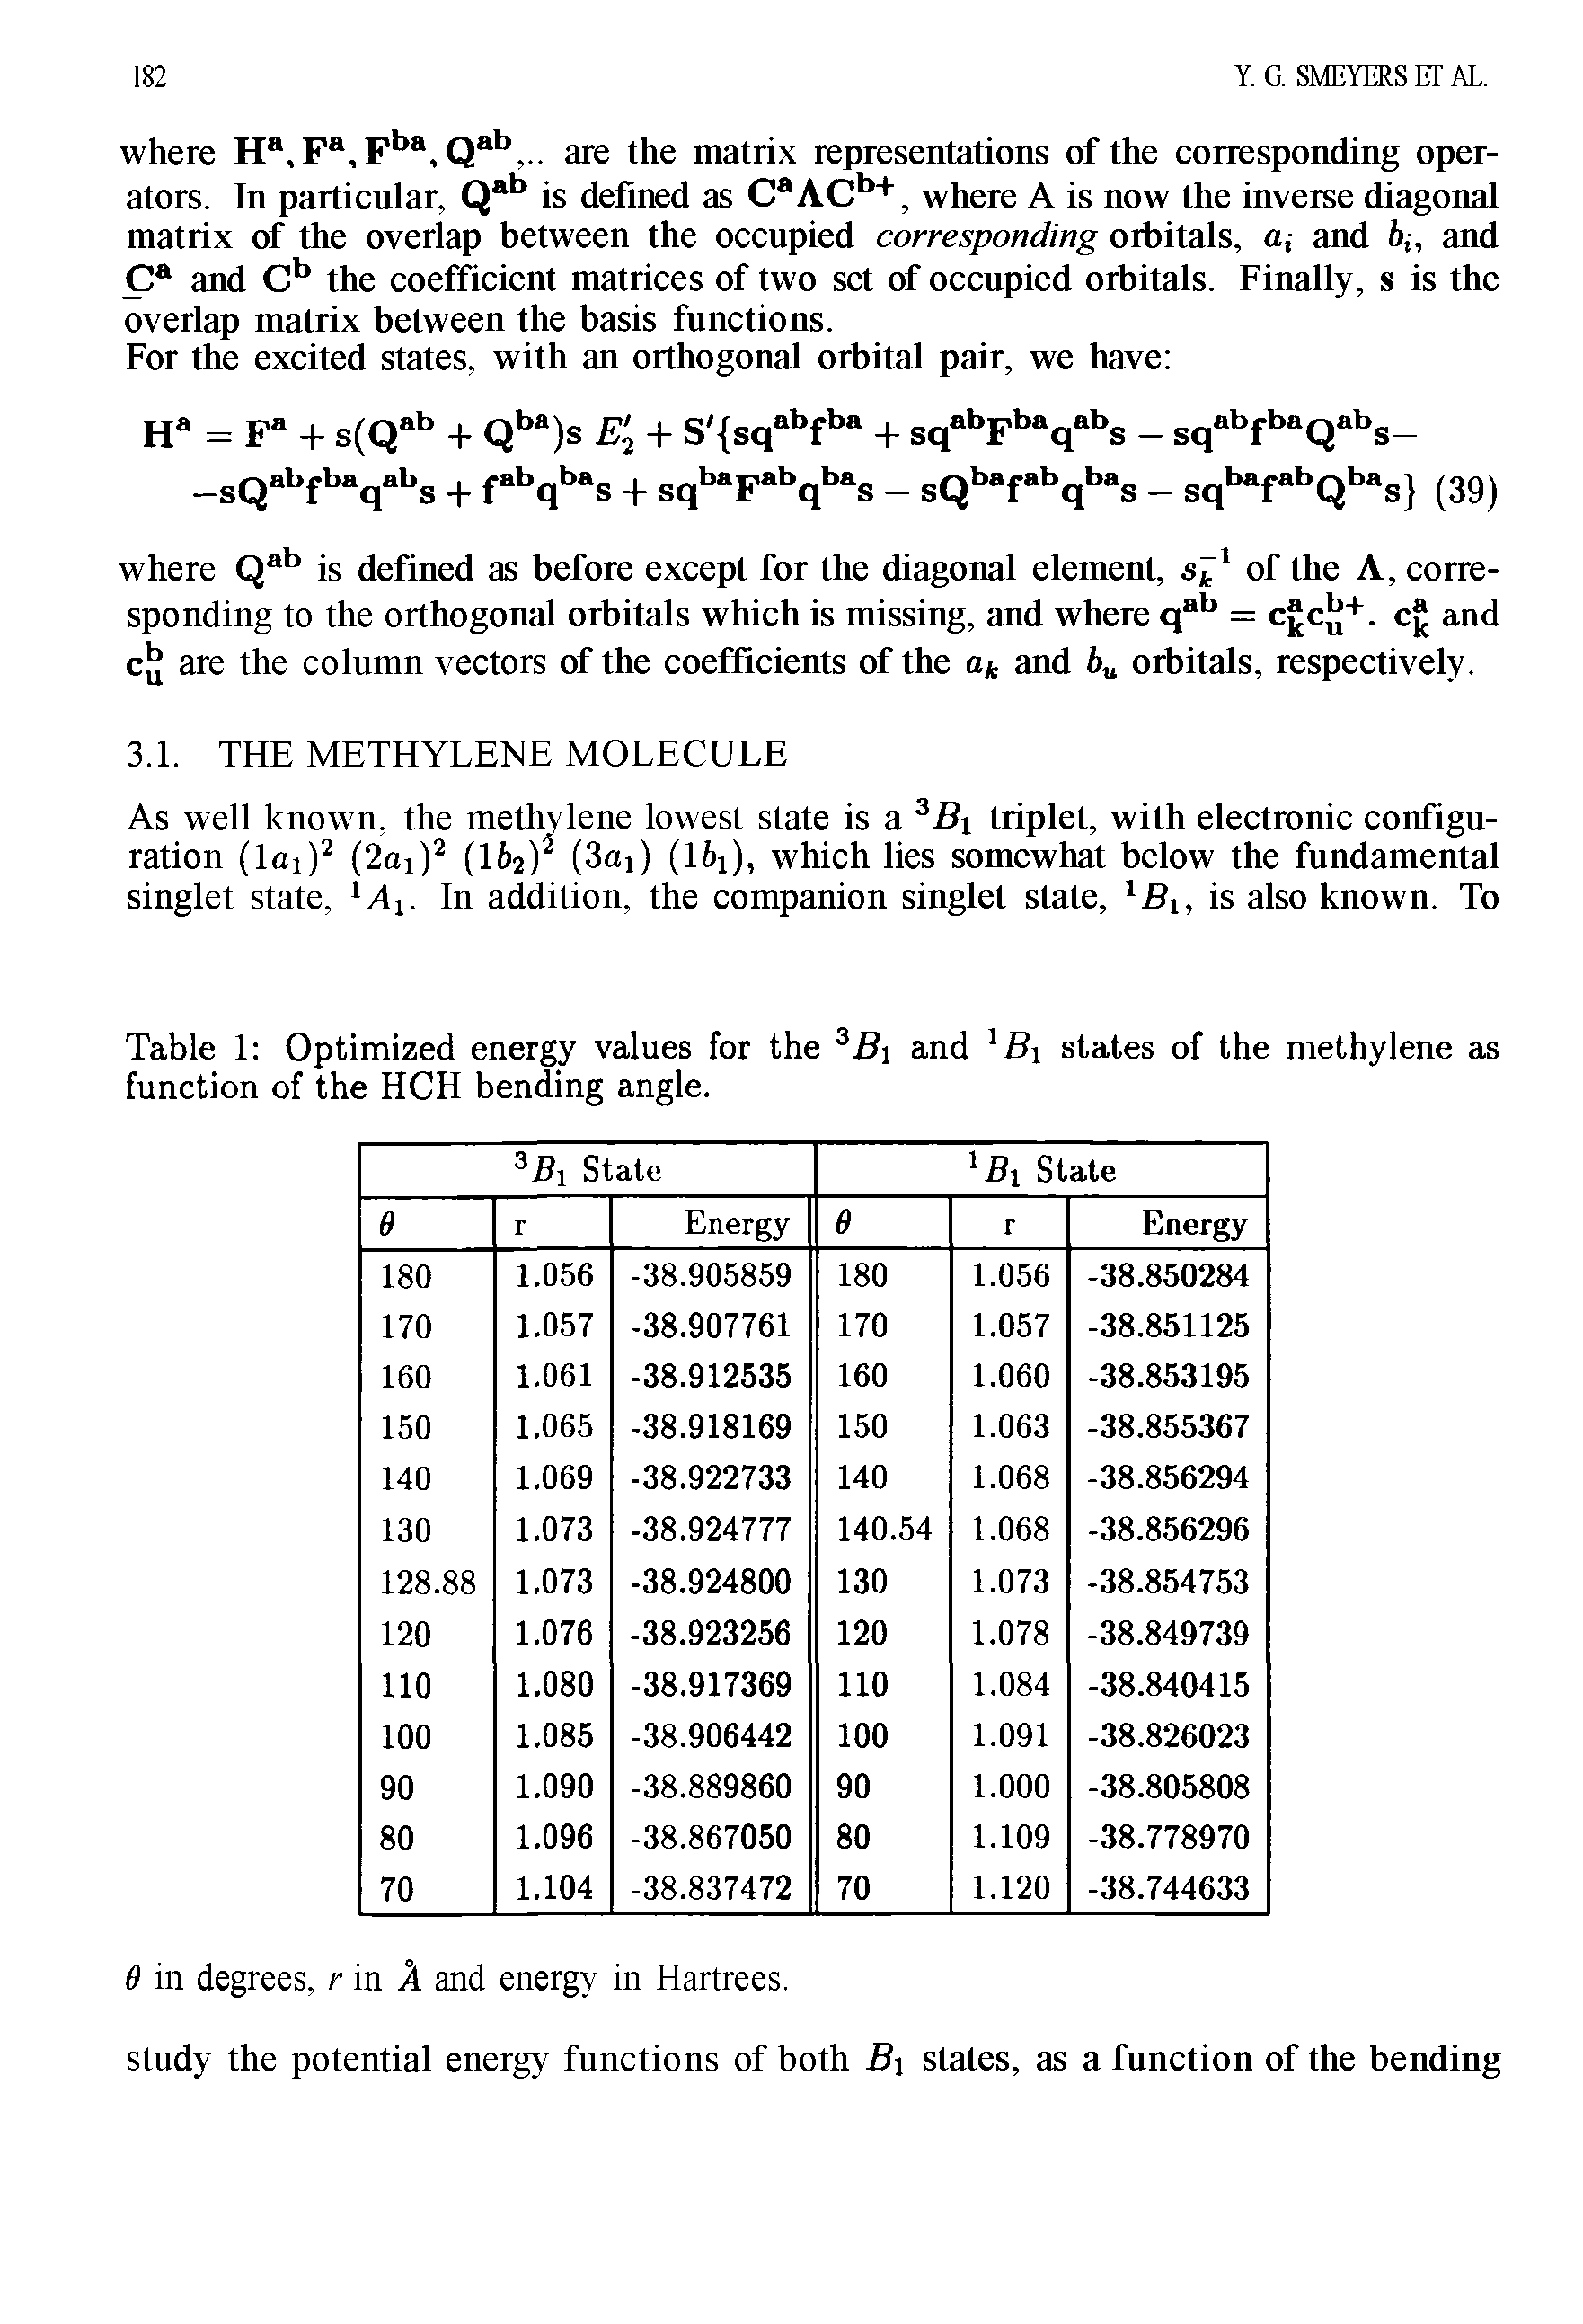 Table 1 Optimized energy values for the and B states of the methylene as function of the HCH bending angle.